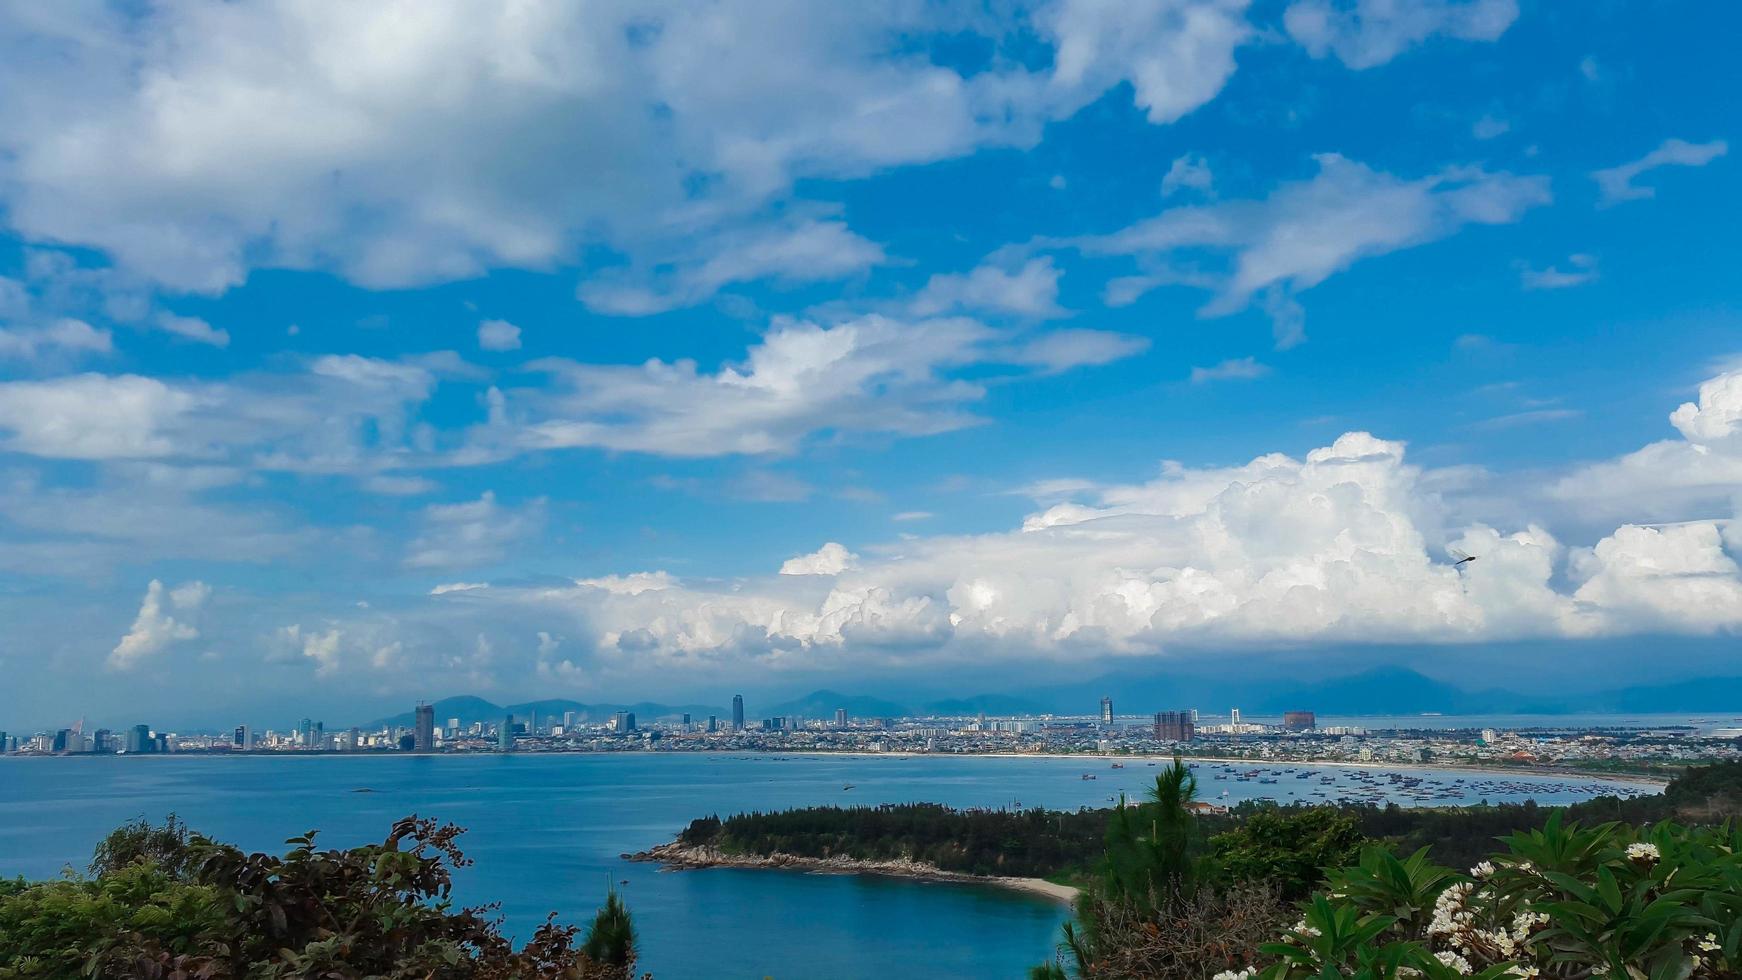 Blue sky with white clouds over a city near the ocean photo